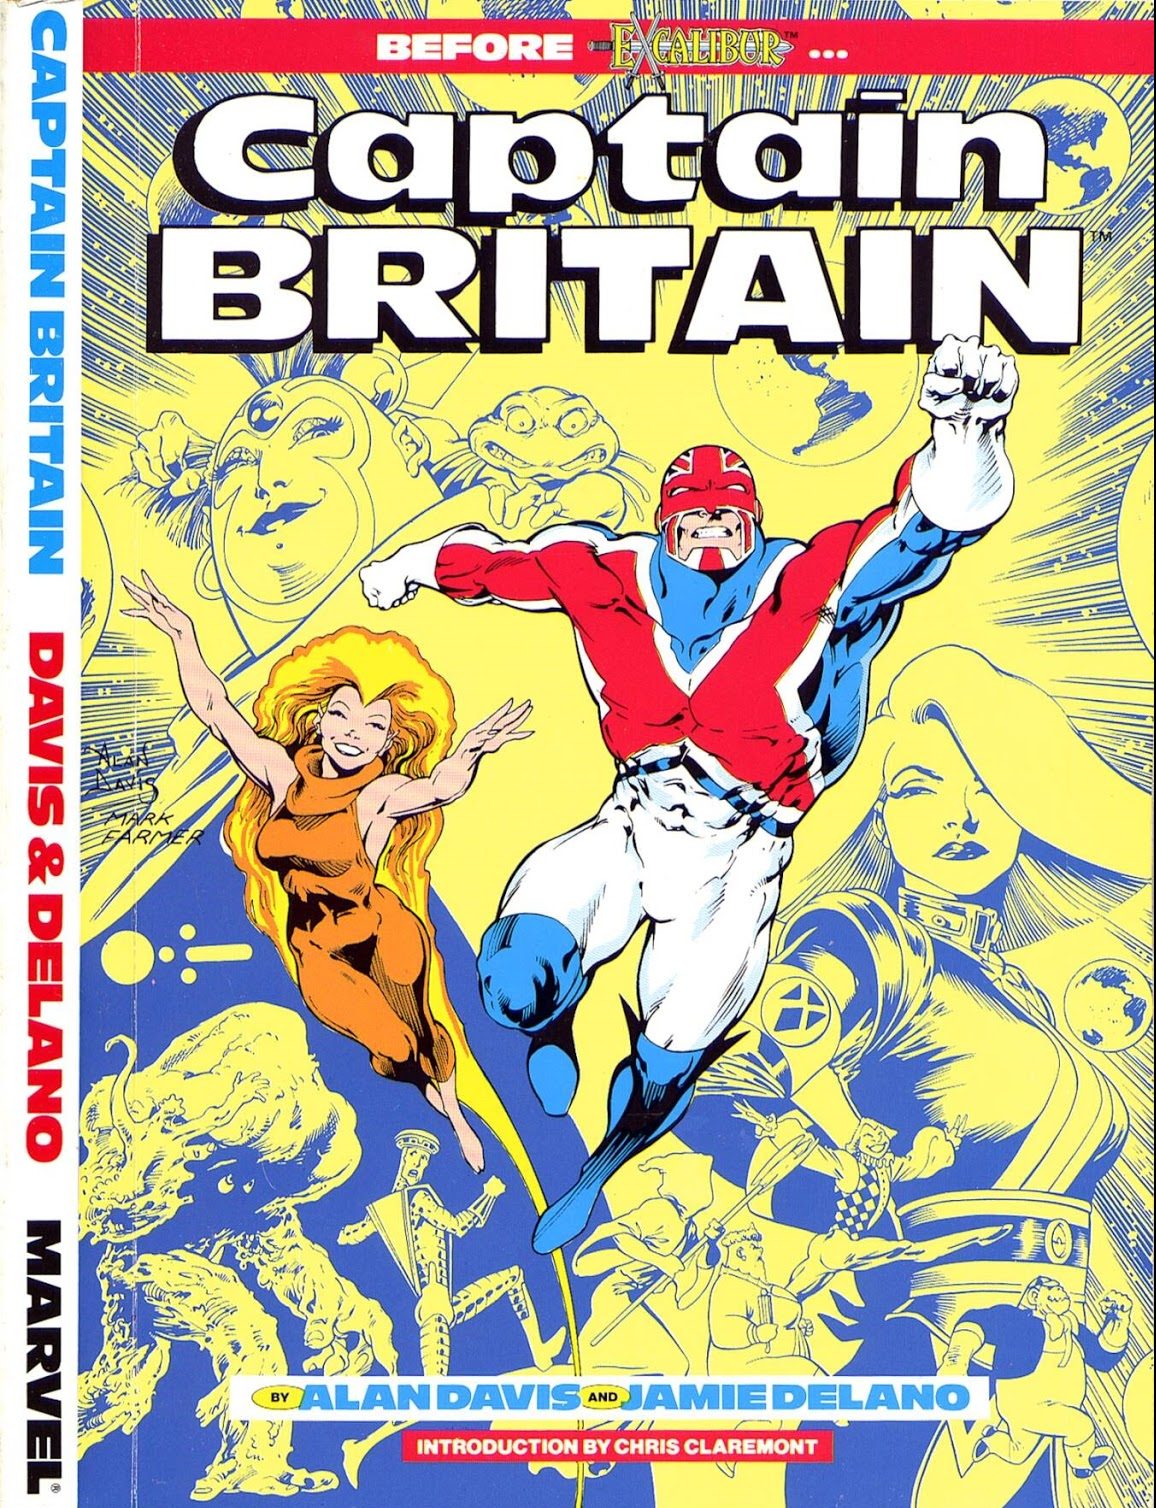 Henry Cavill will be entering the Marvel Cinematic Universe as Captain  Britain